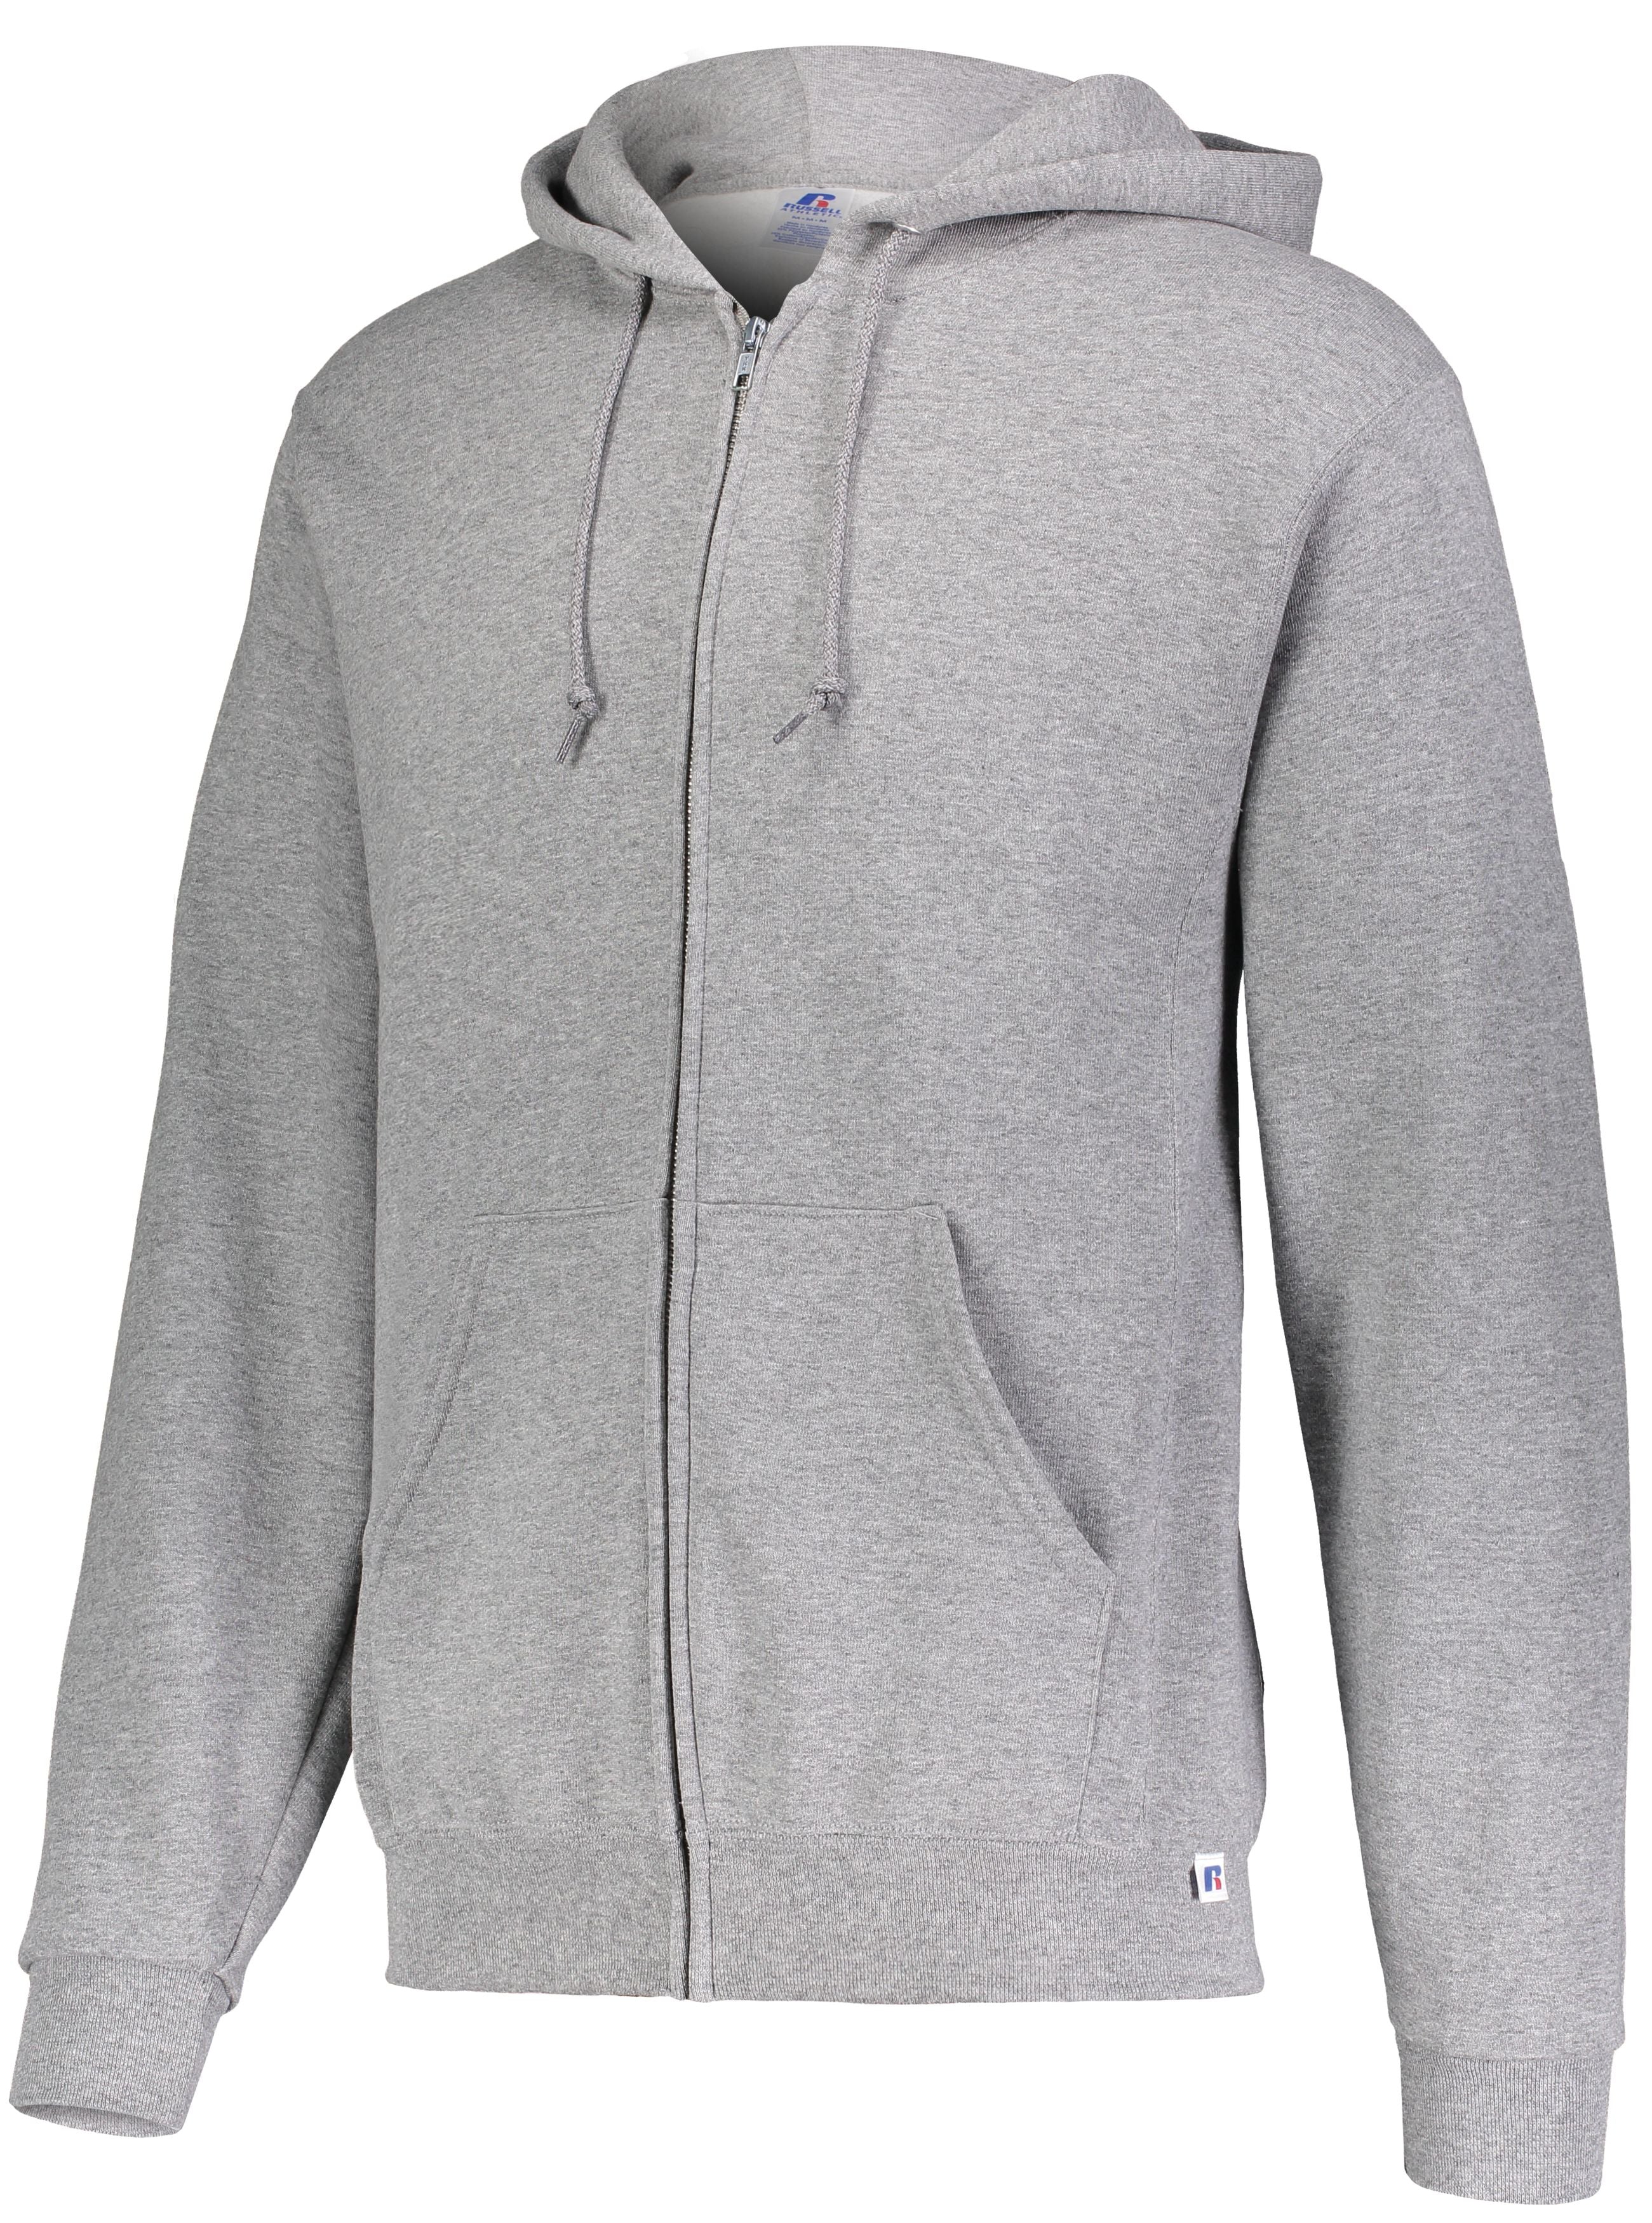 Russell Athletic Dri-Power Fleece Full-Zip Hoodie in Oxford  -Part of the Adult, Russell-Athletic-Products, Shirts product lines at KanaleyCreations.com